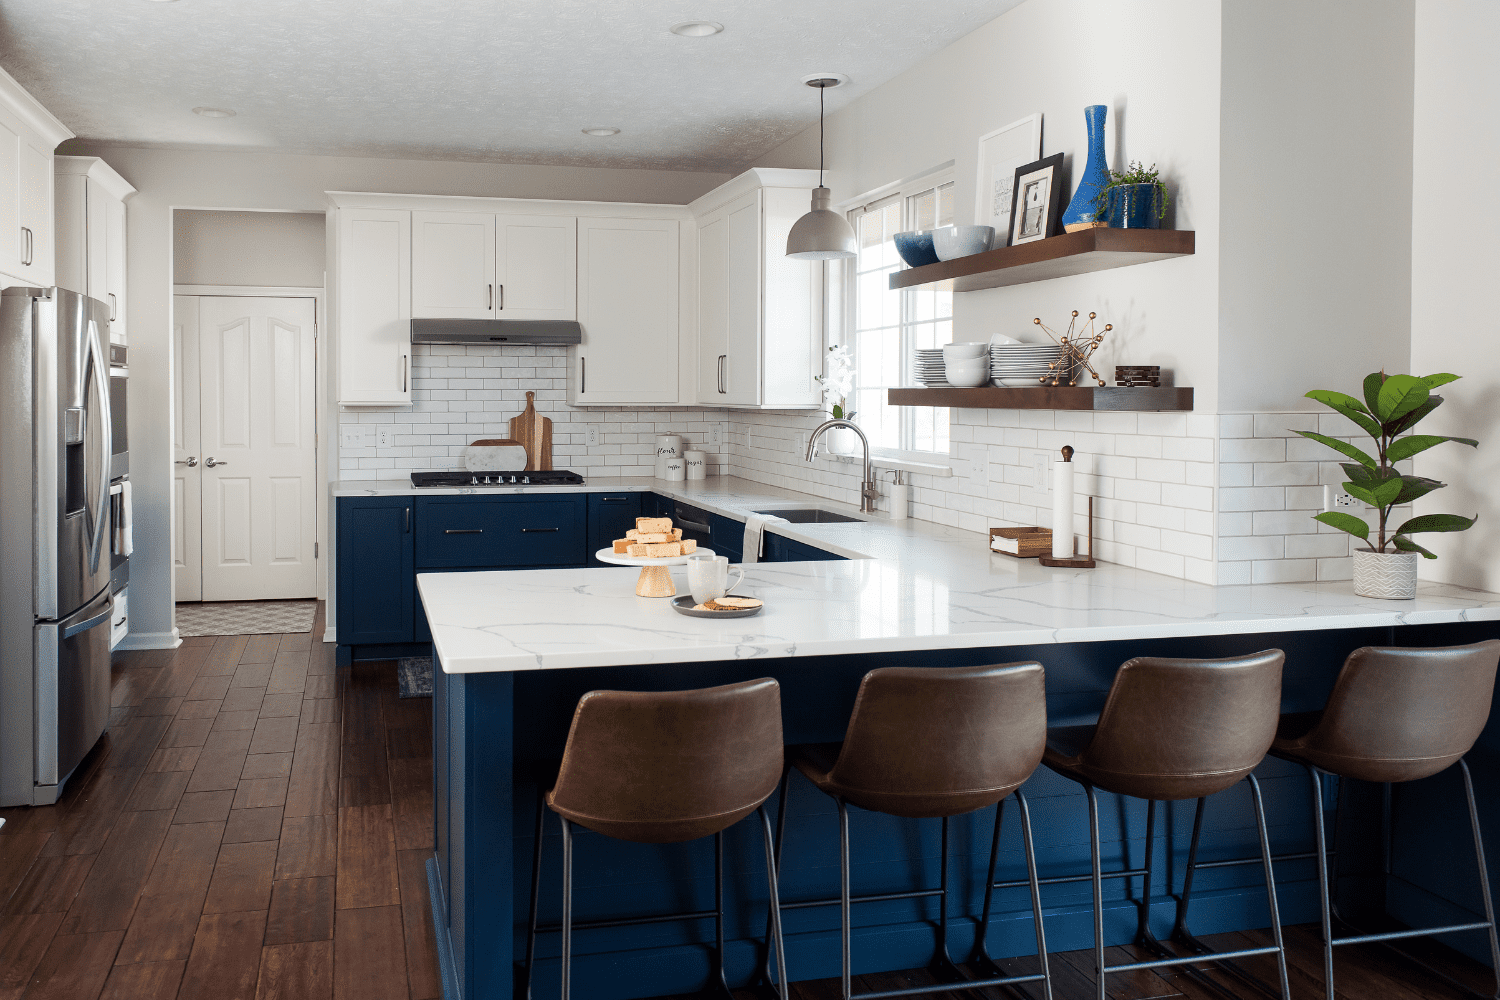 Nicholas Design Build | A kitchen with blue cabinets and stools.